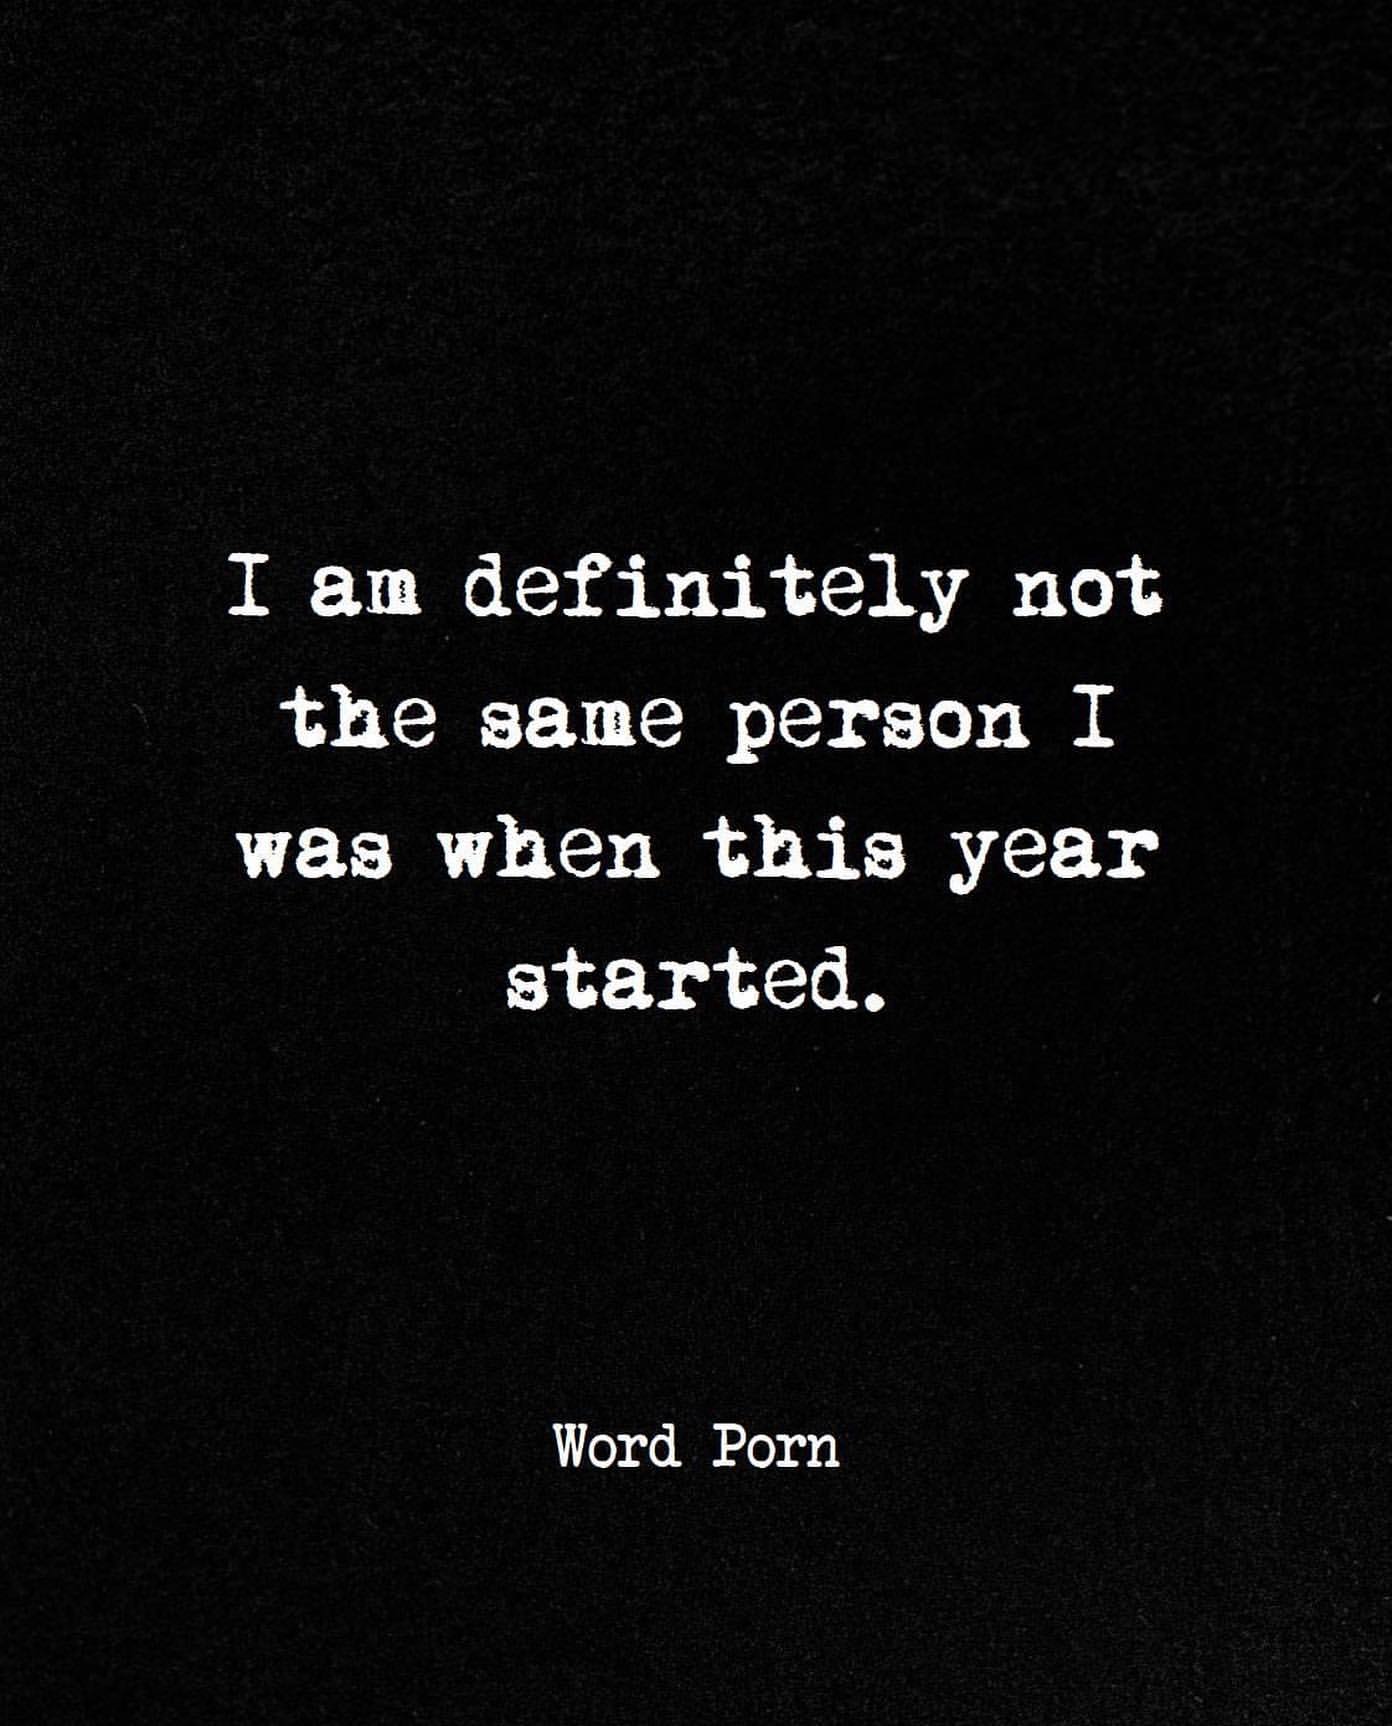 I am definitely not the same person I was when this year started.